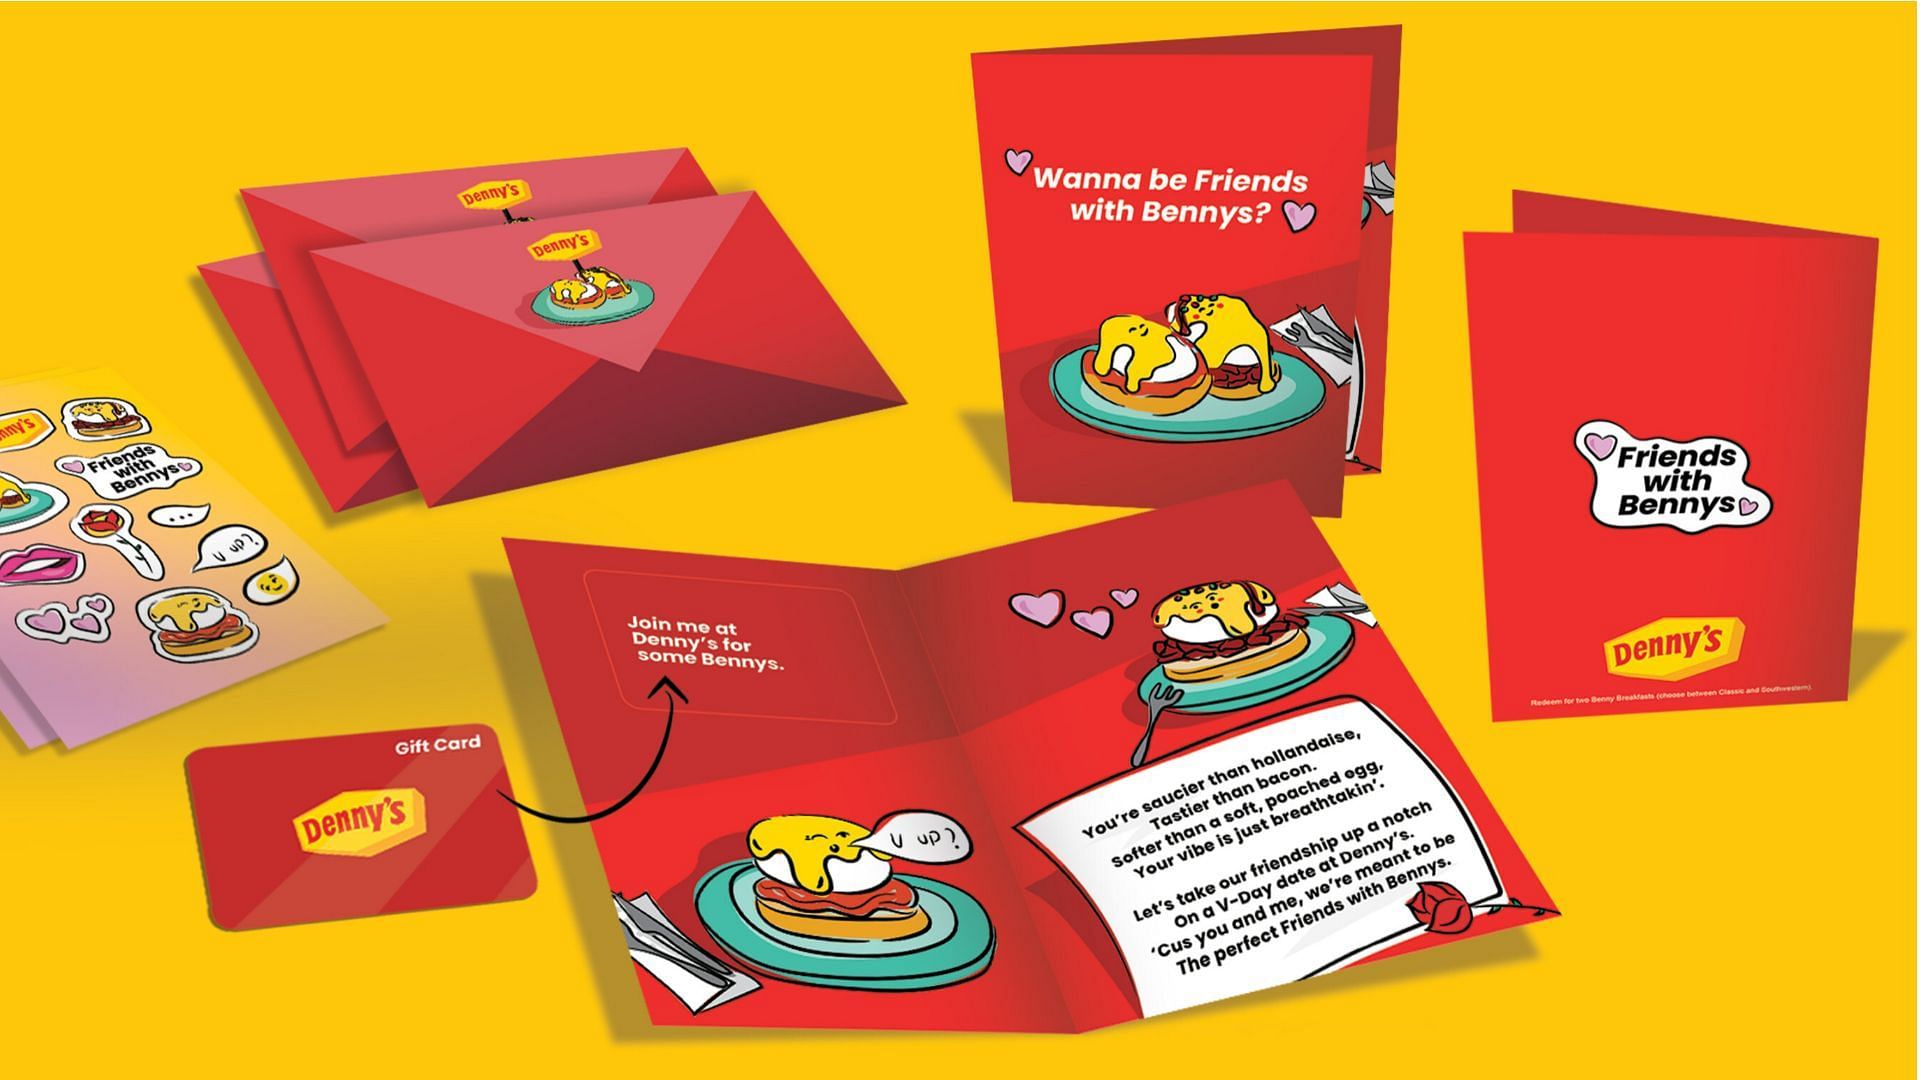 Denny&rsquo;s Dinner offers a limited-edition &lsquo;&lsquo;Friends with Benny&rsquo;s&rsquo;&rsquo; card to the first 500 customers (Image via Denny&rsquo;s Dinner)